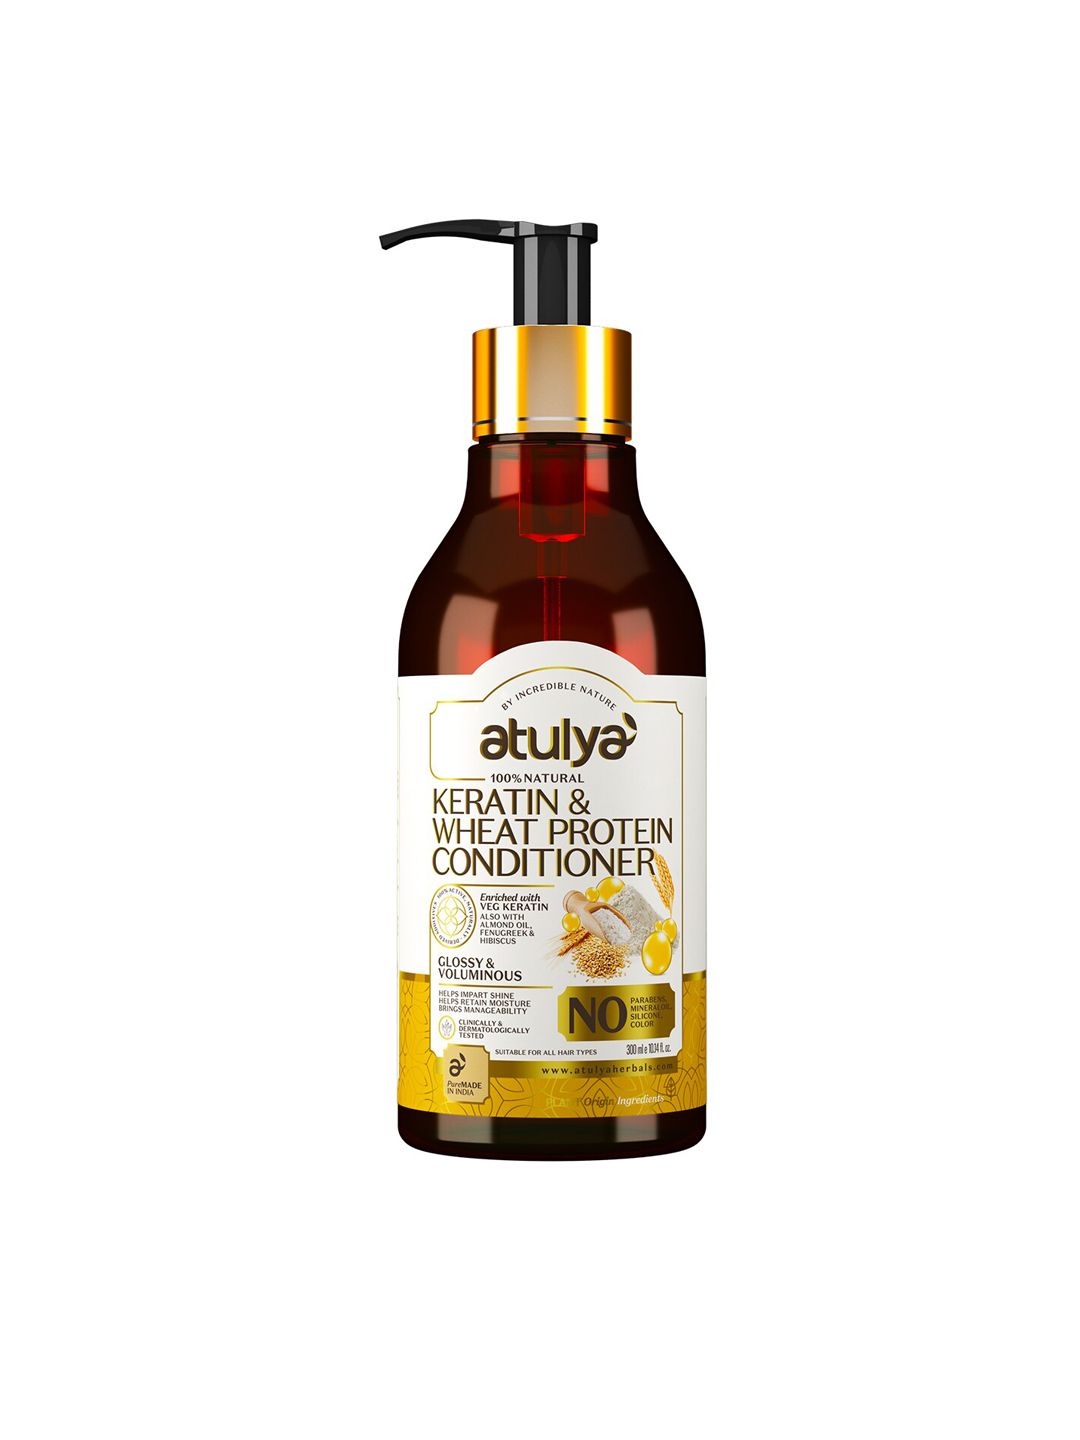 Atulya Keratin & Wheat Protein Hair Conditioner for Glossy Hair 300 ml Price in India